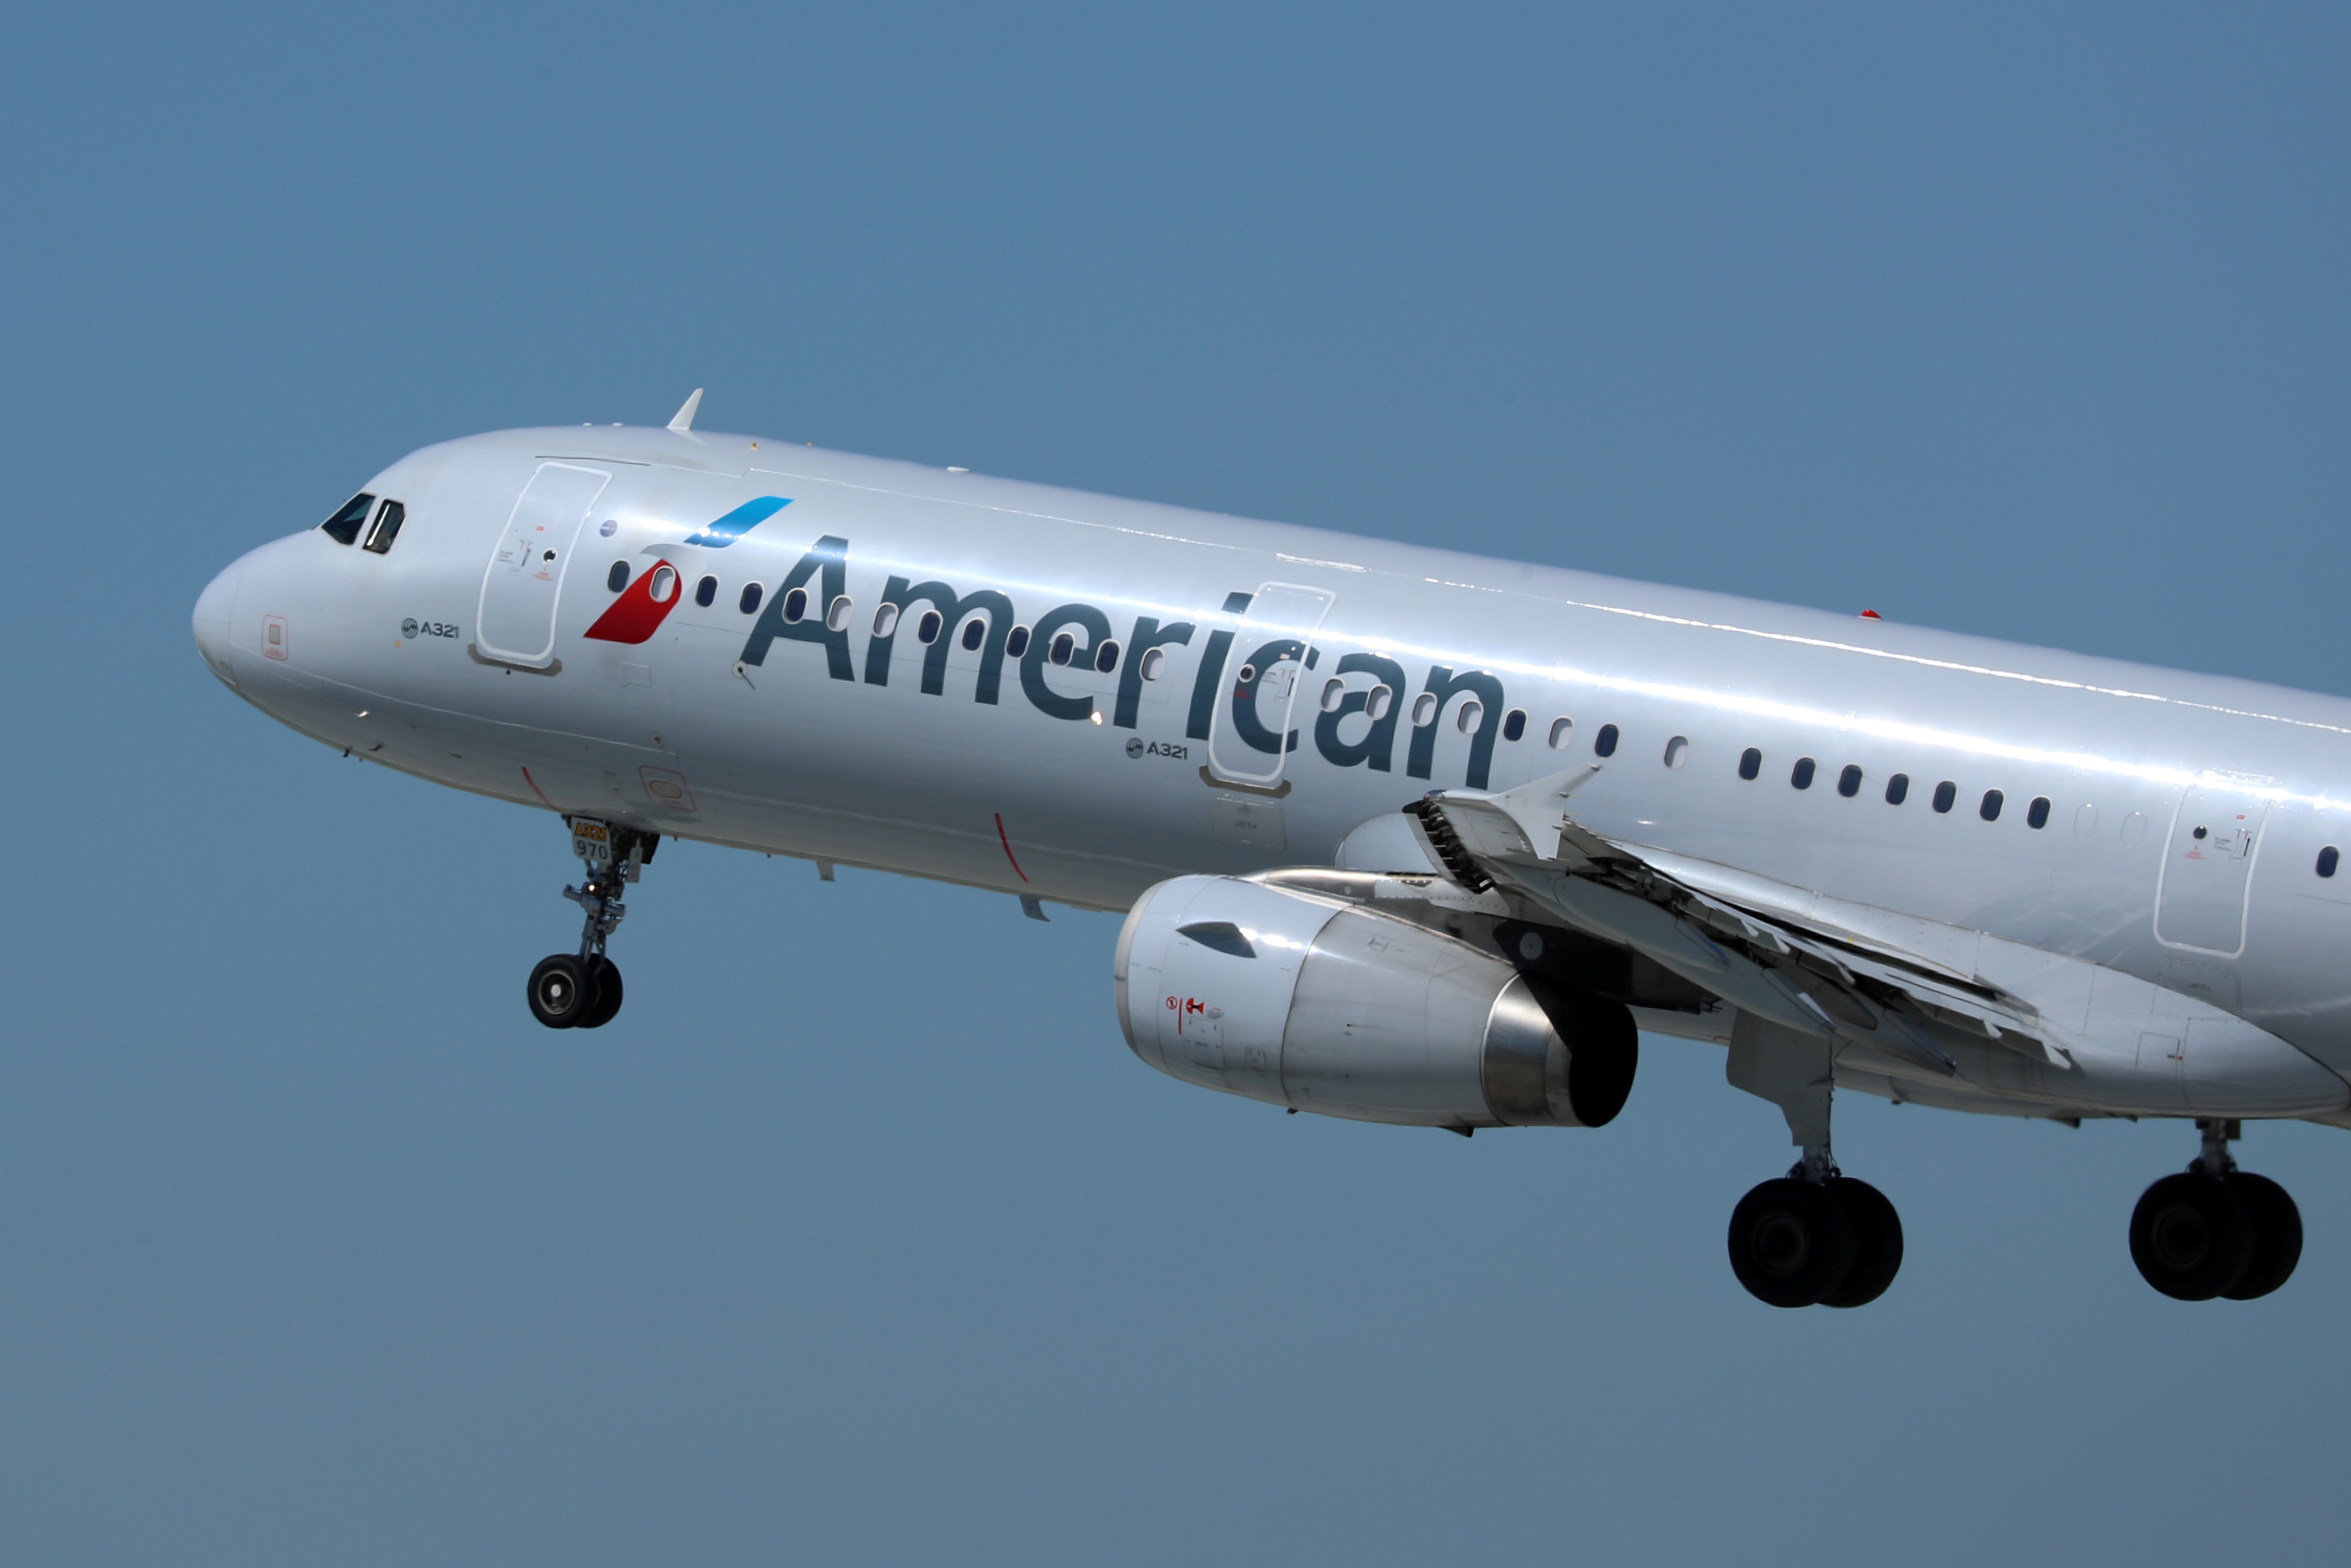 An American Airlines Airbus A321 plane takes off from Los Angeles International airport